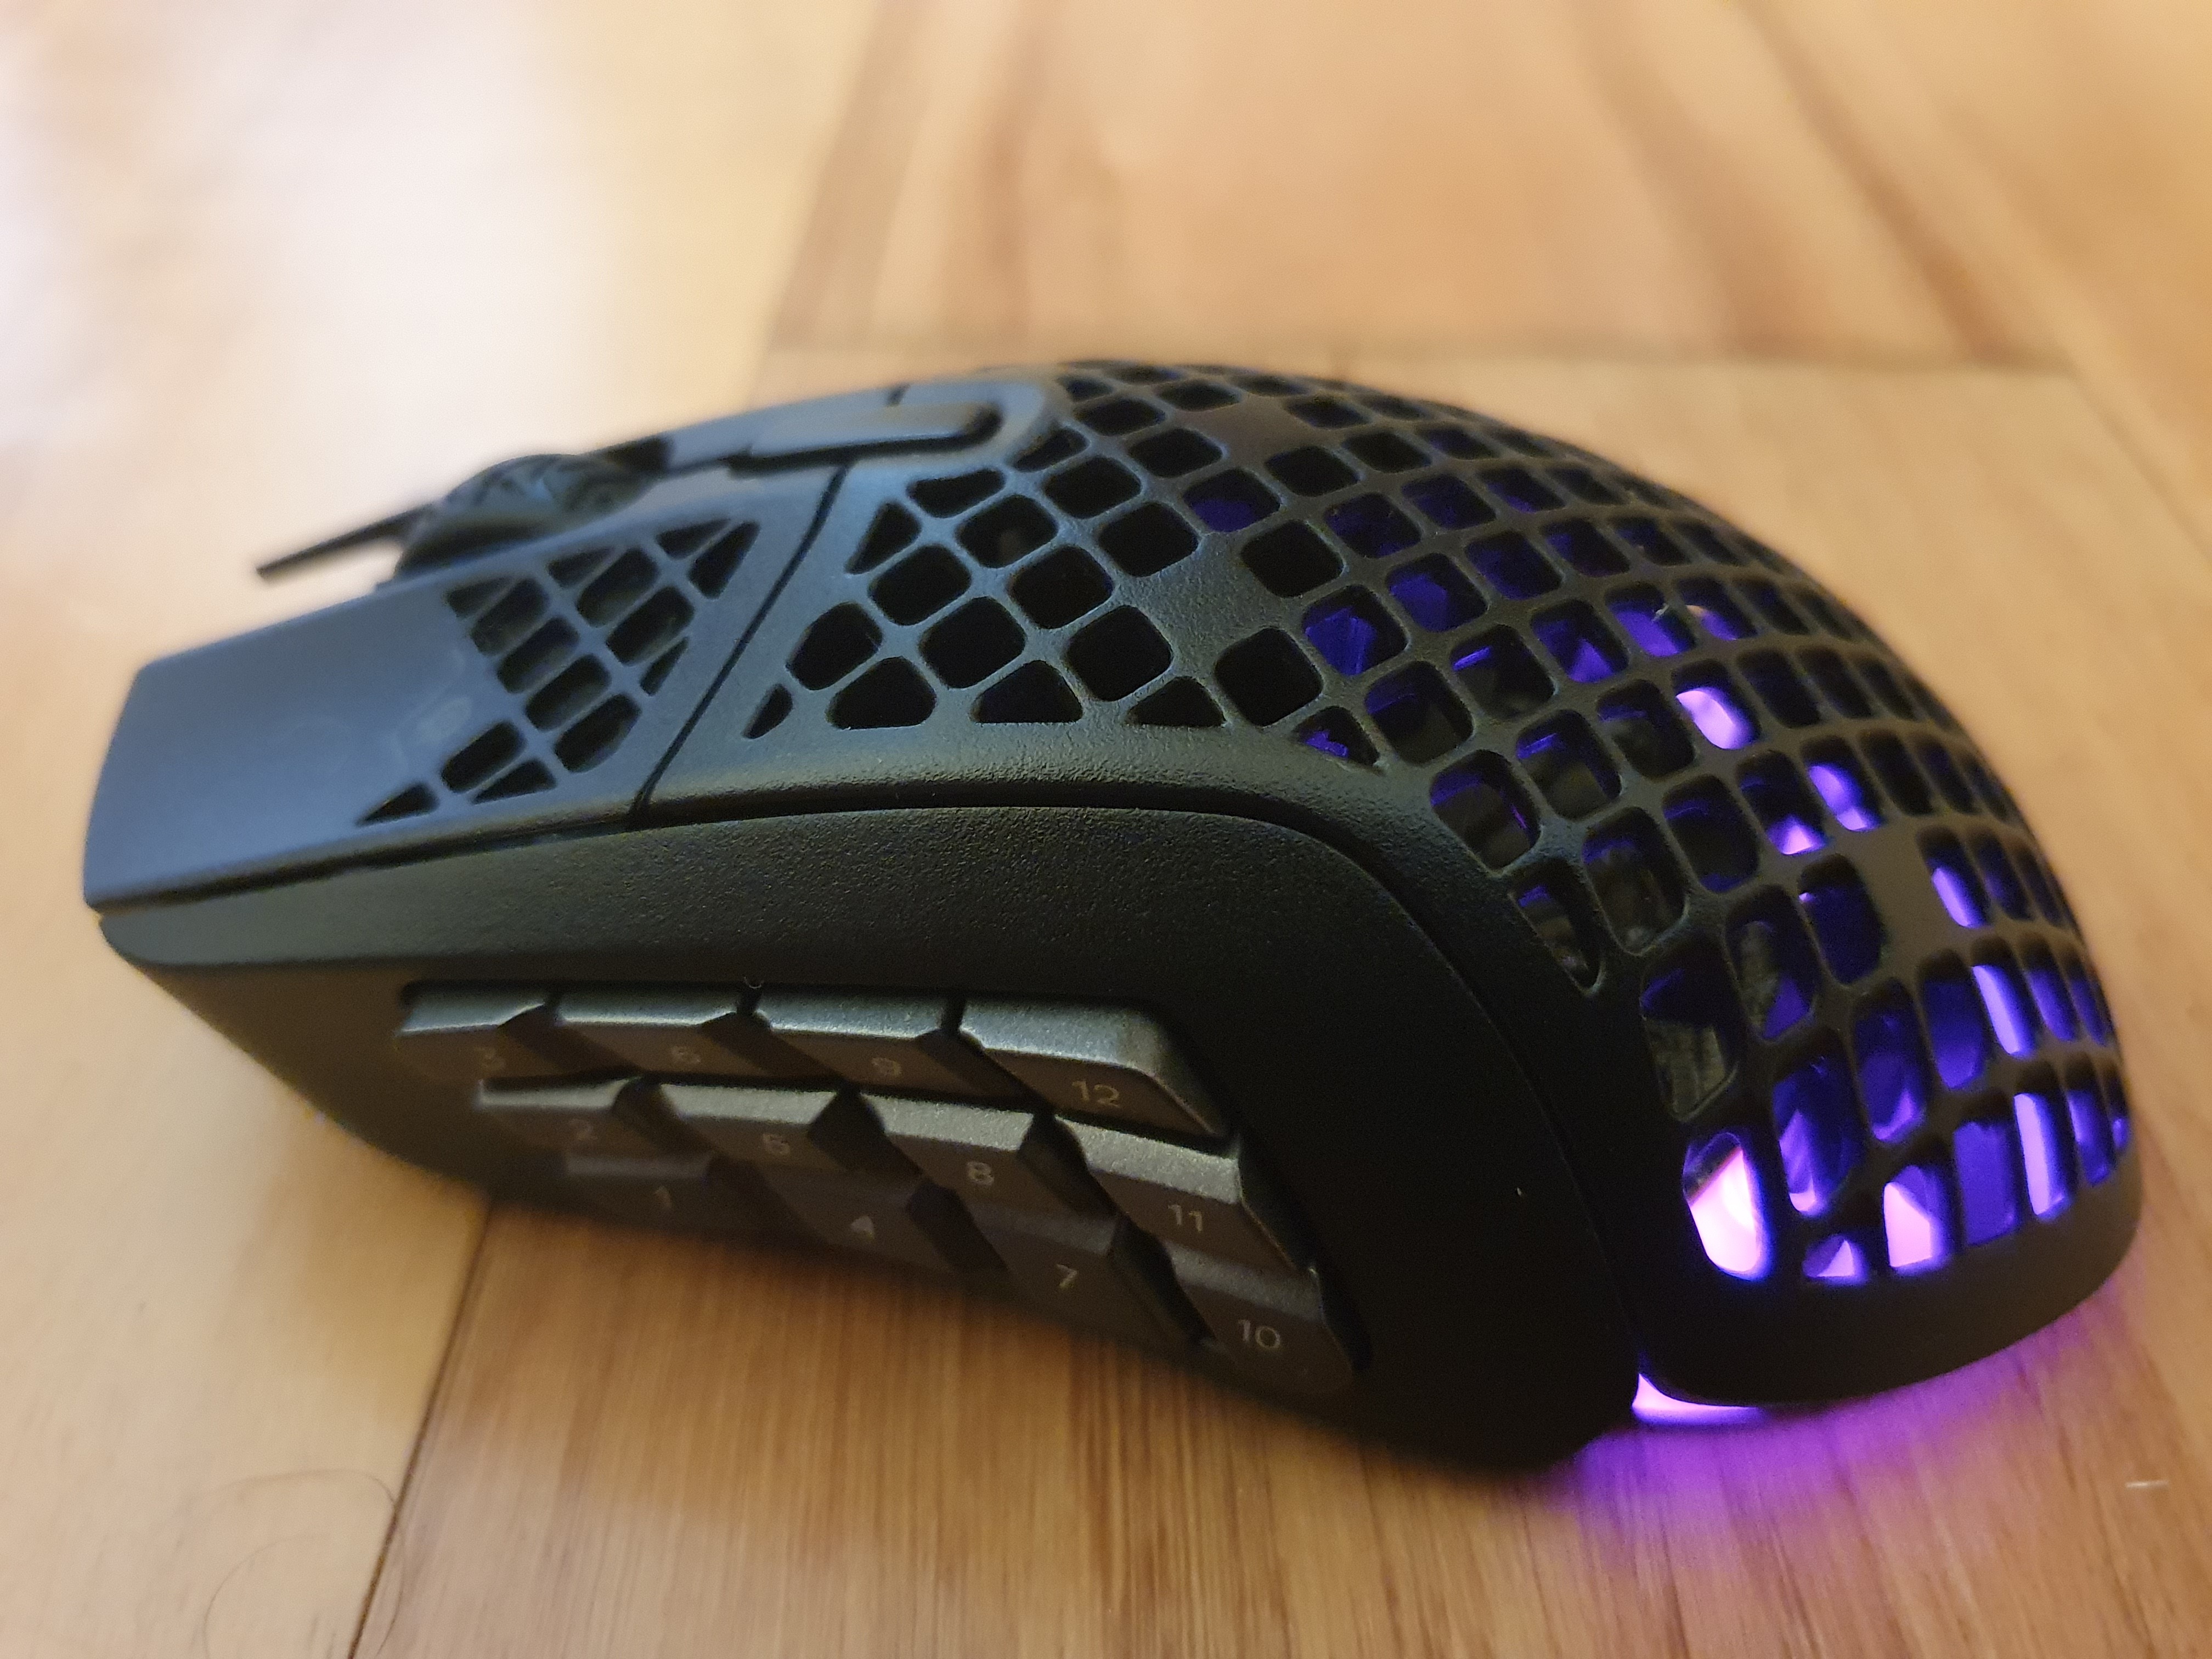 SteelSeries Aerox 9 Wireless - Best gaming mouse for MOBA and MMO games runner-up